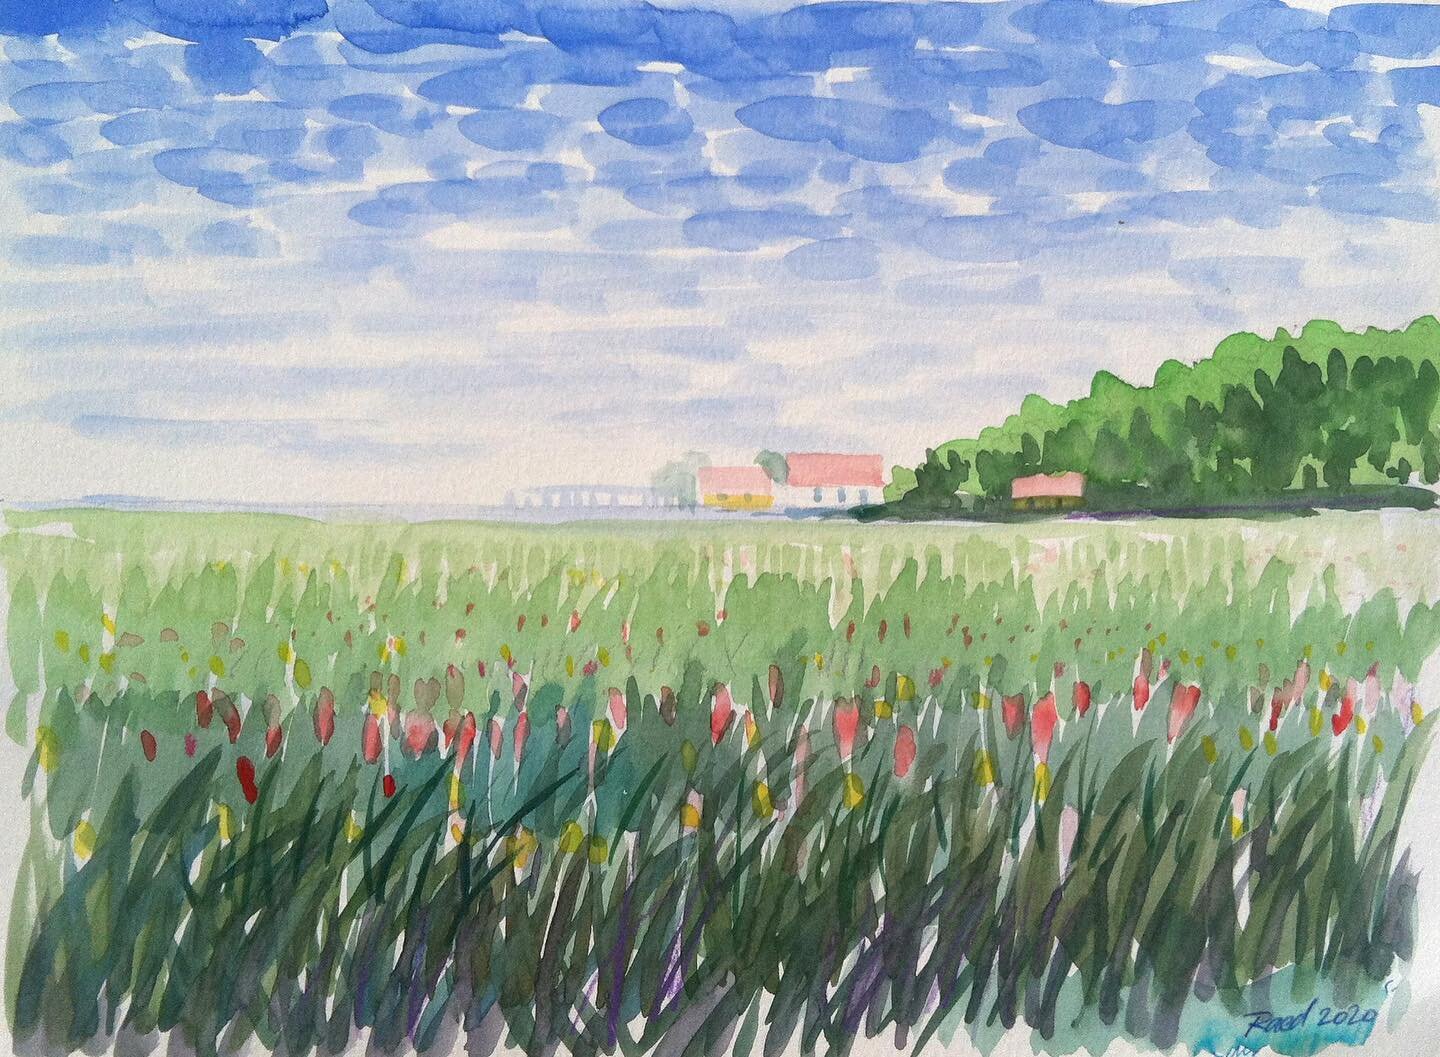 This is the Field in watercolor showed to our beginner watercolor young students. Message us if you are interested in taking watercolor class with us!! 😀😀😀😀
#charlotteartist #watercolor #charlotteartstudio #parents #art #fineart #creativity #arte